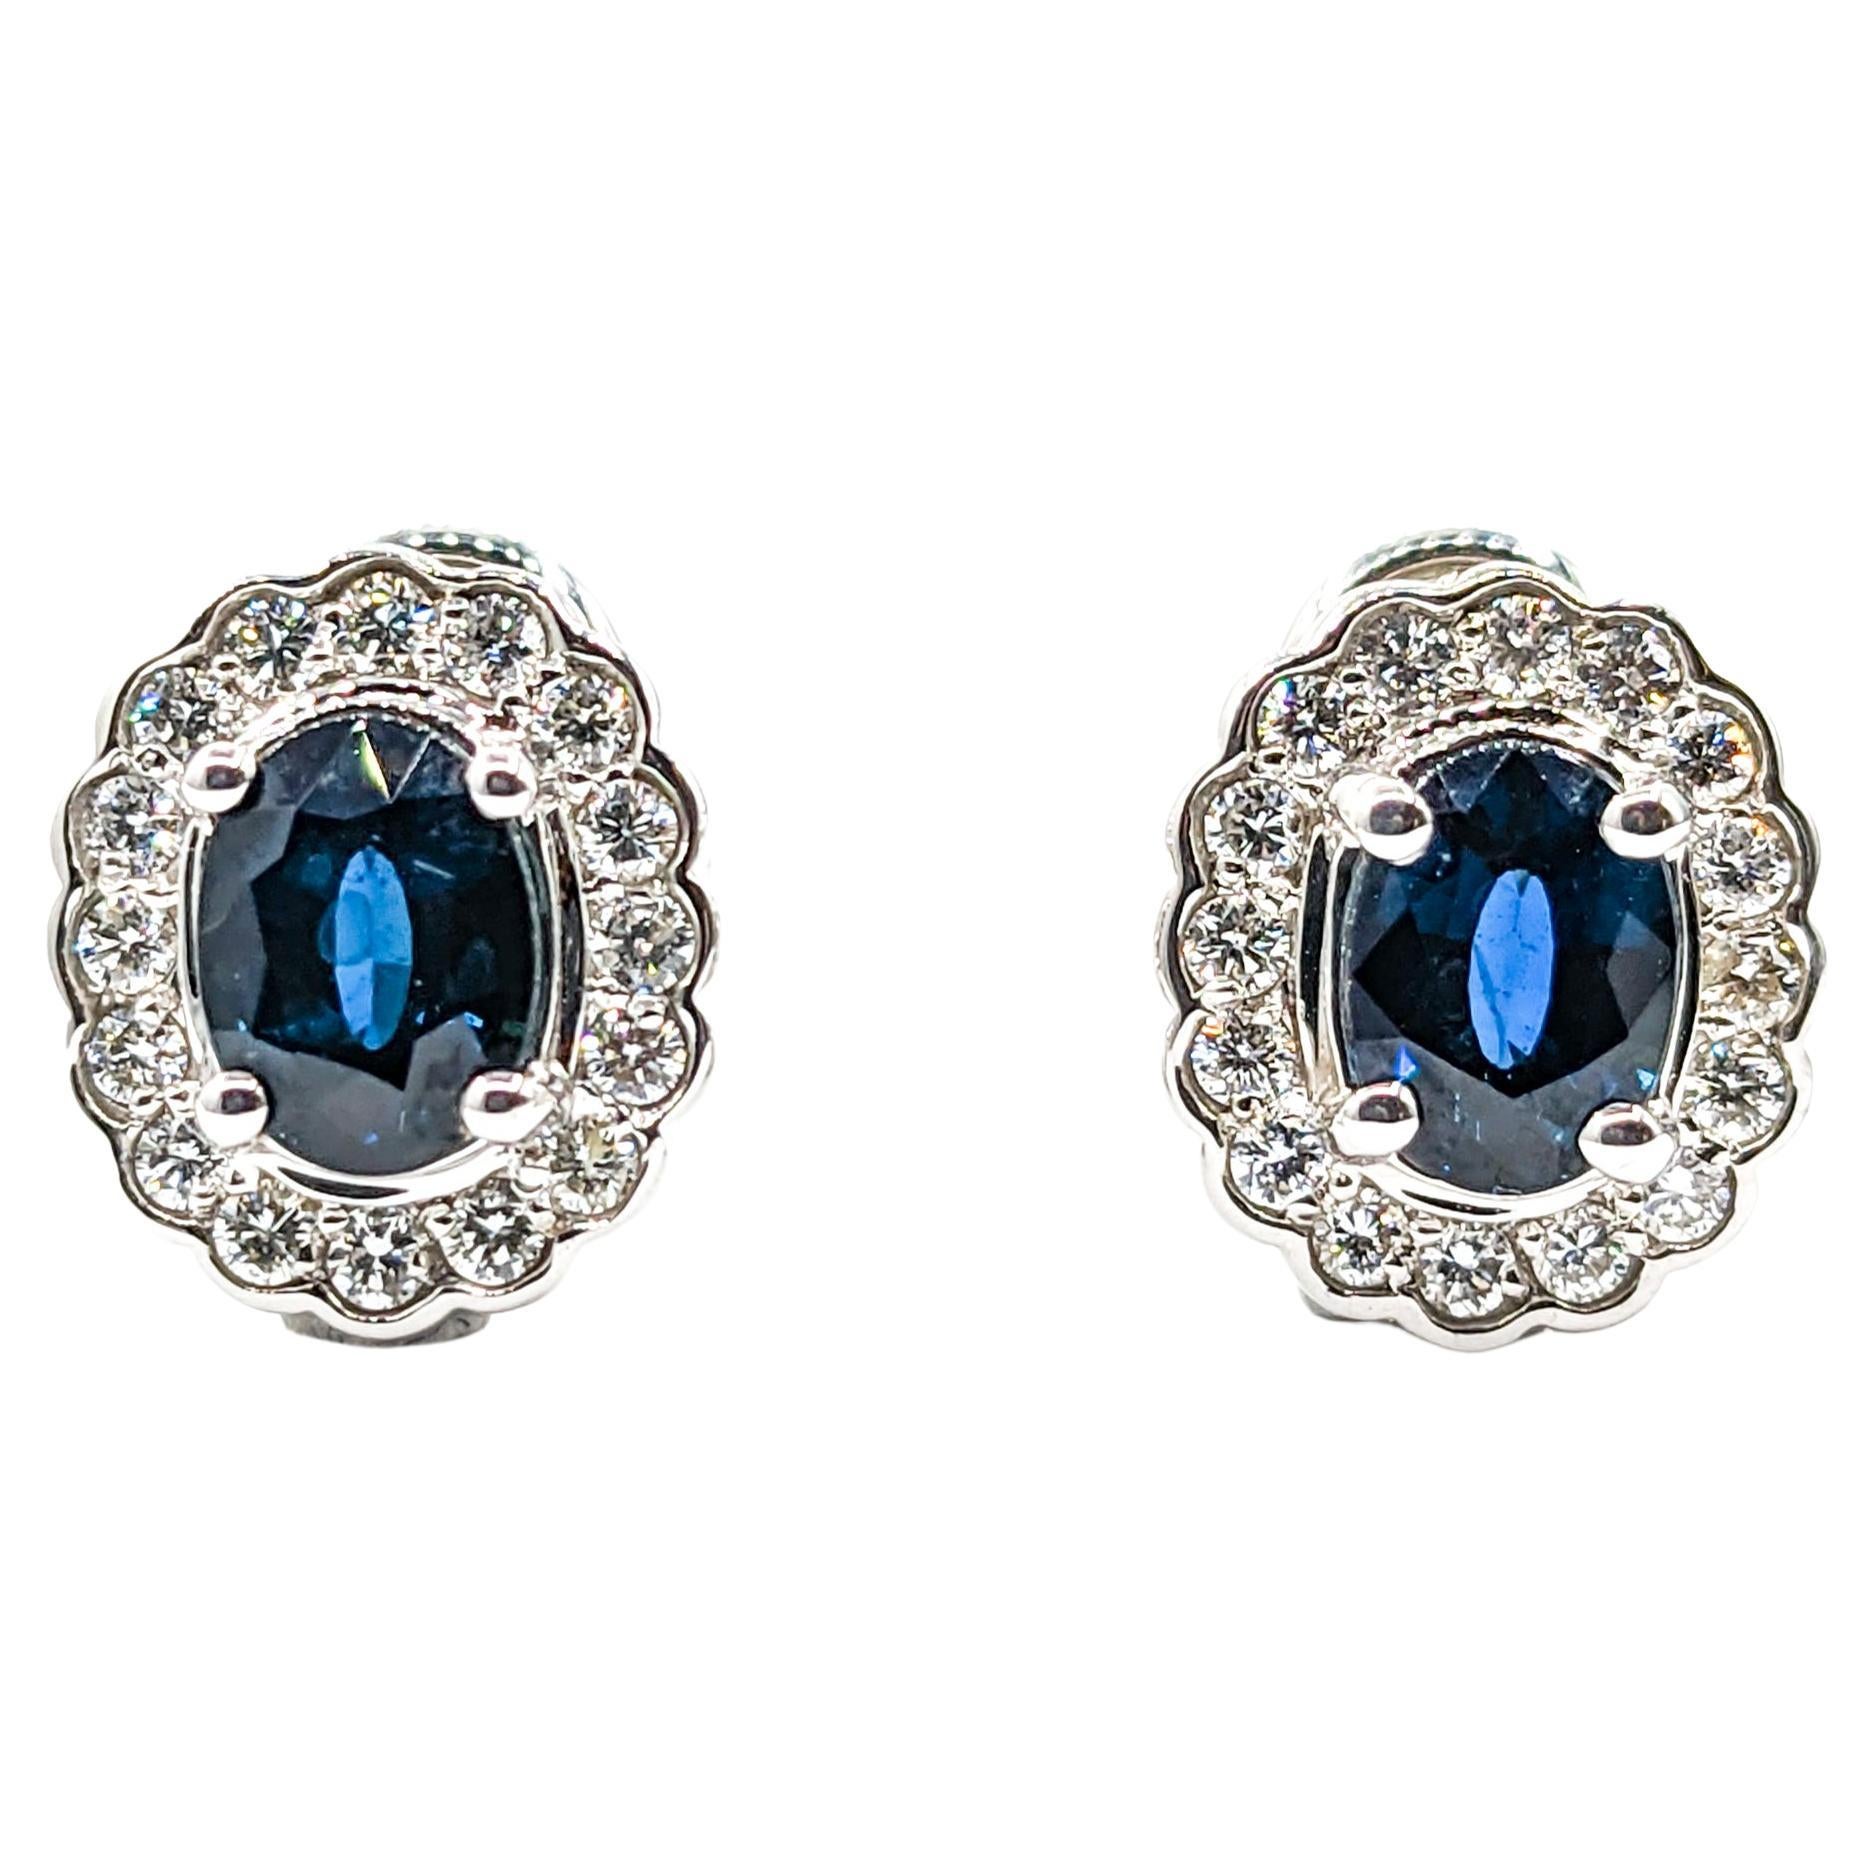 Exquisite Sapphire and White Diamond Earrings In White Gold